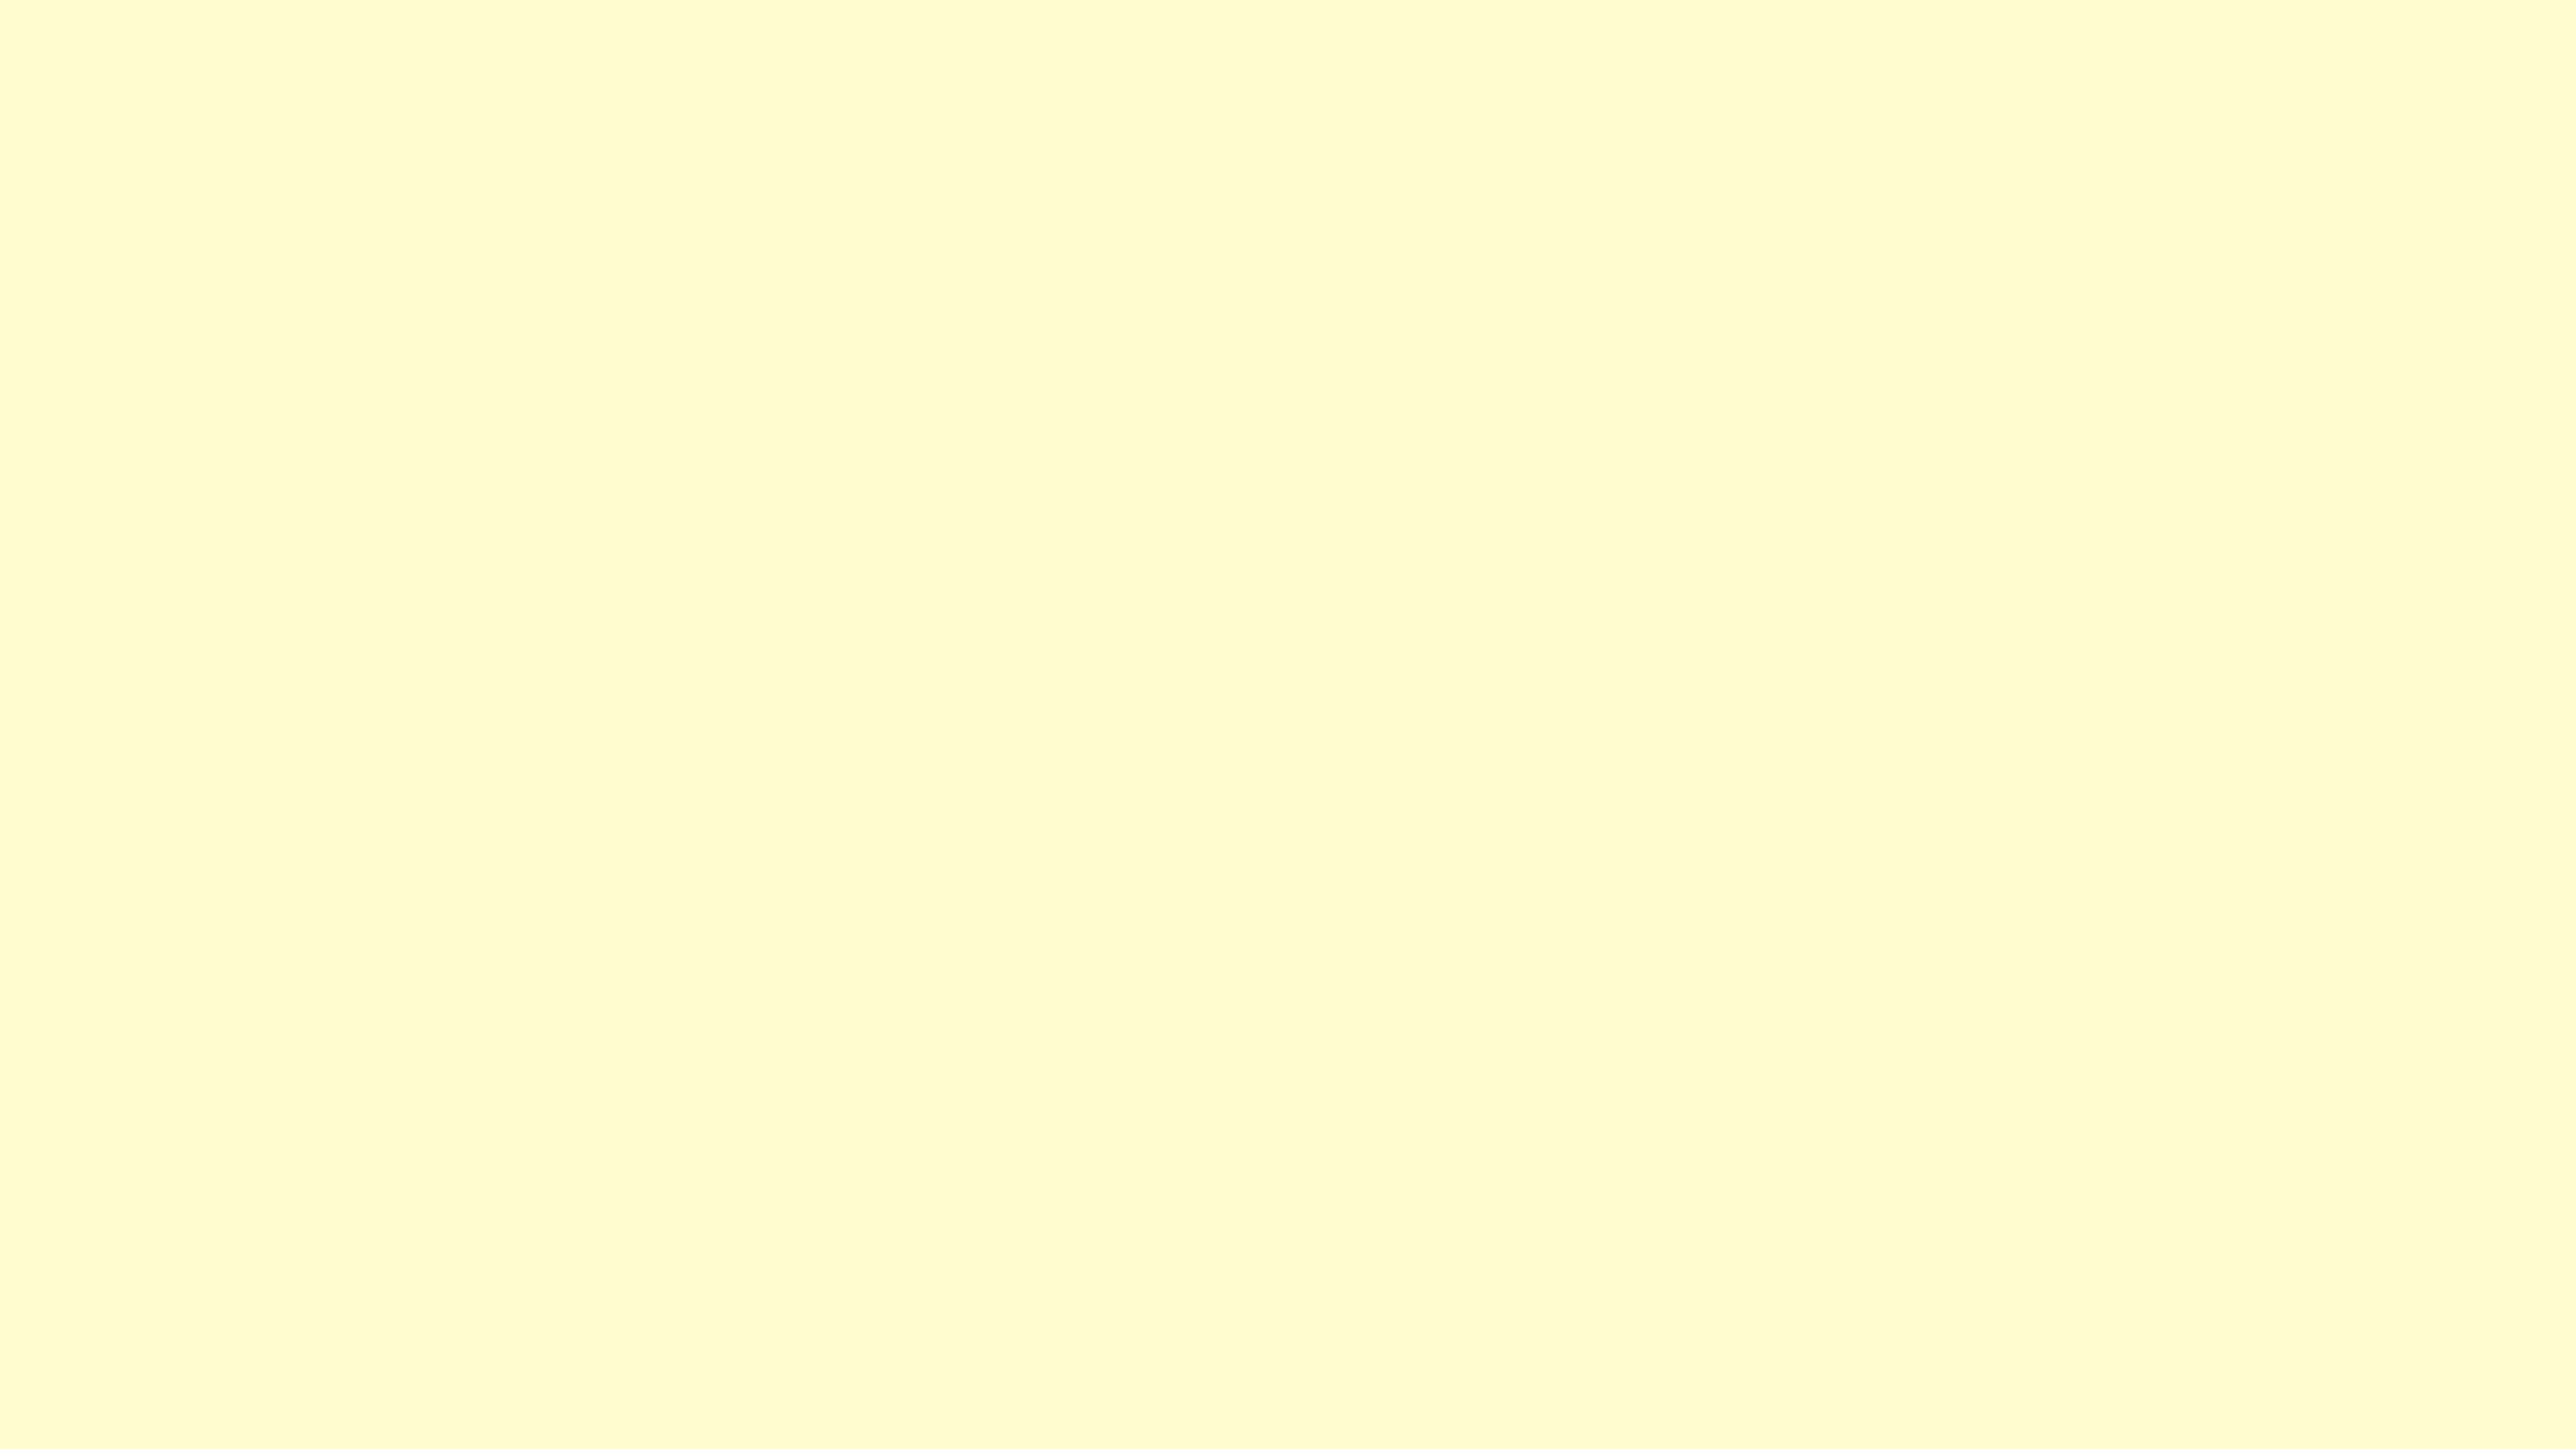 7680x4320 Cream Solid Color Background